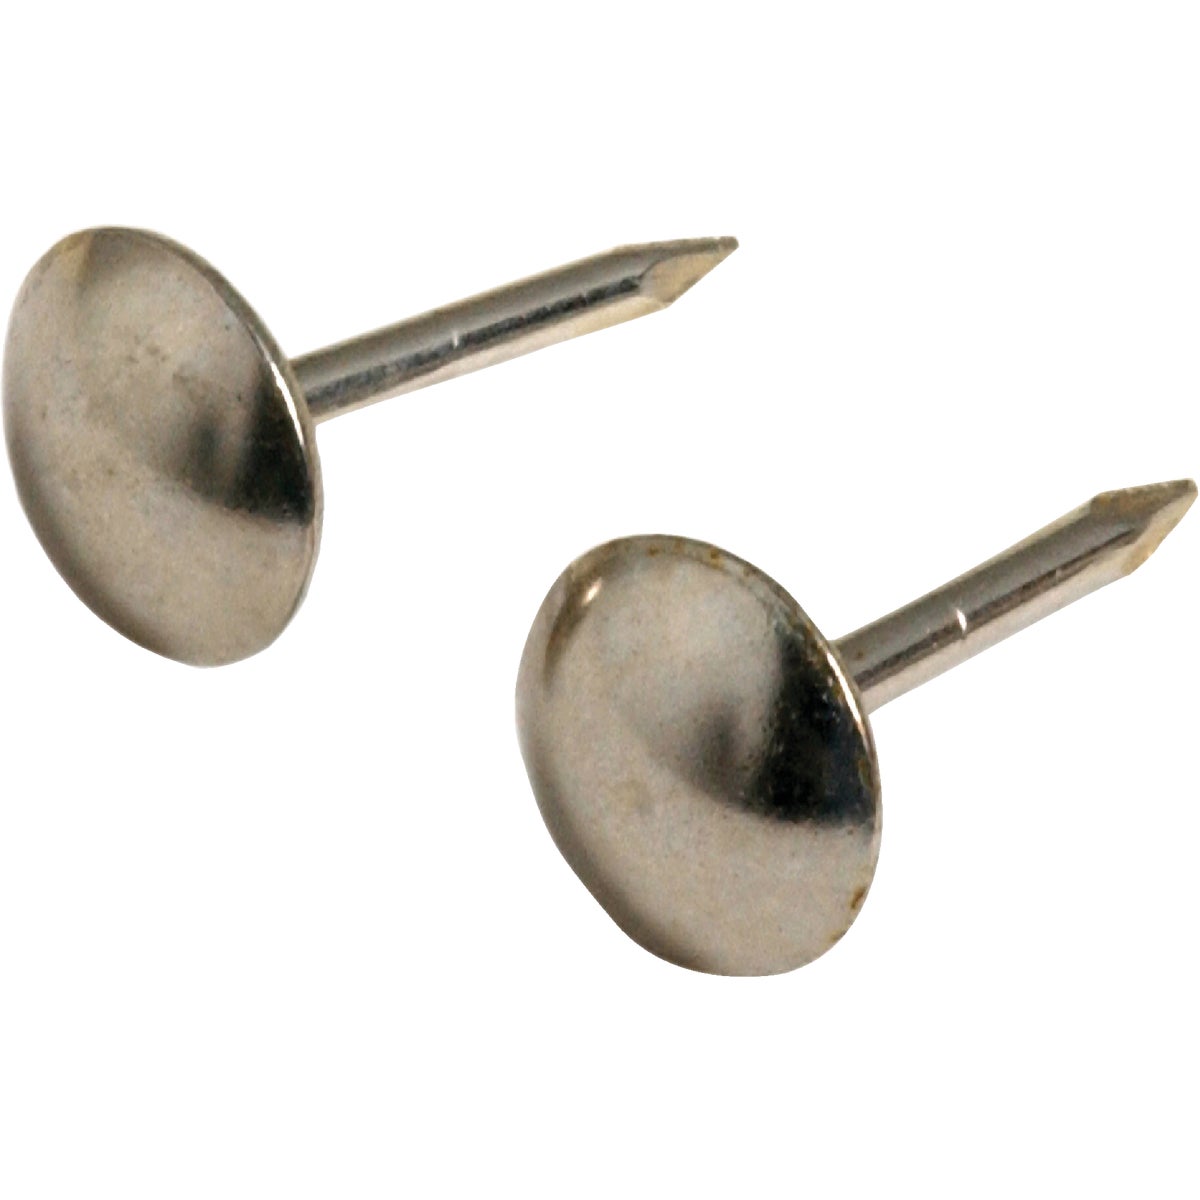 Item 720223, Nickel-Plated Round Head Furniture Nails can be used to trim furnishings 